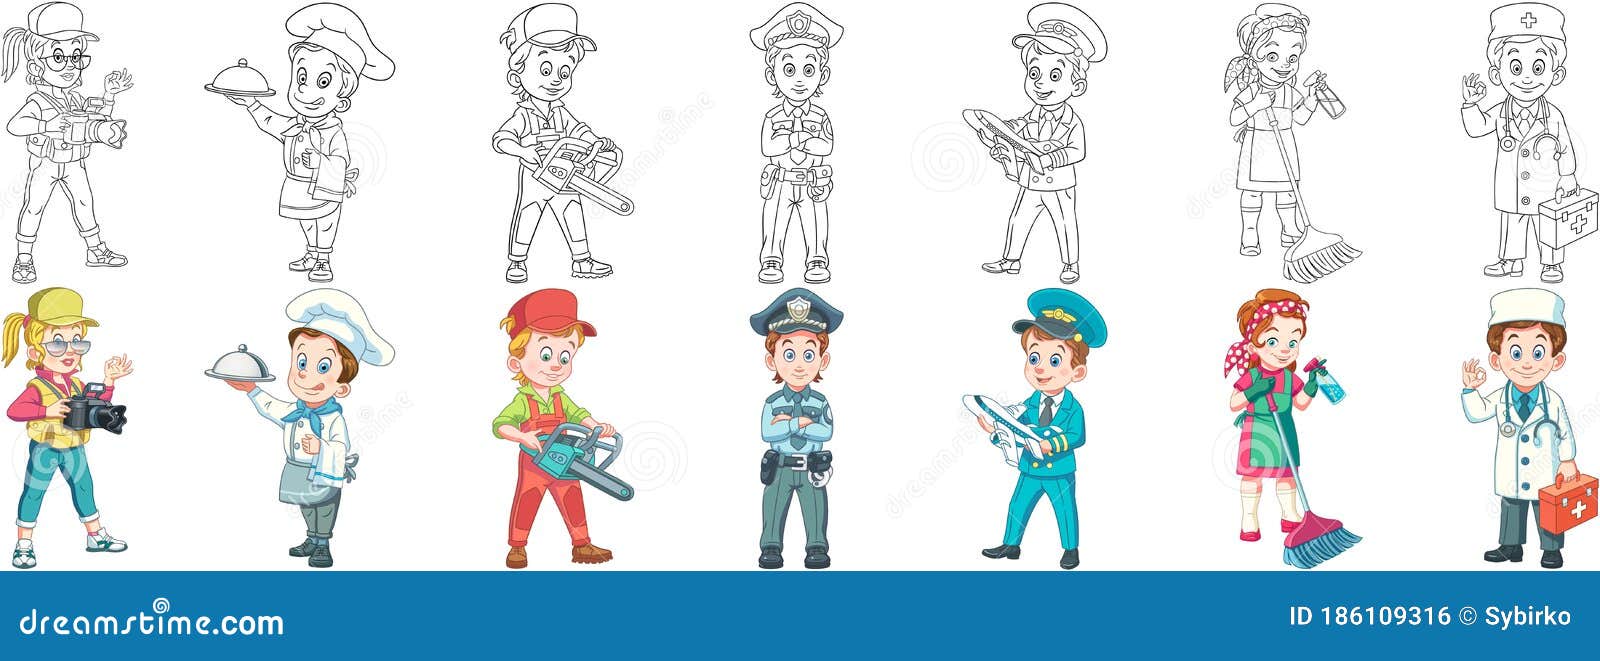 Coloring Pages For Kids. Professions Stock Vector - Illustration